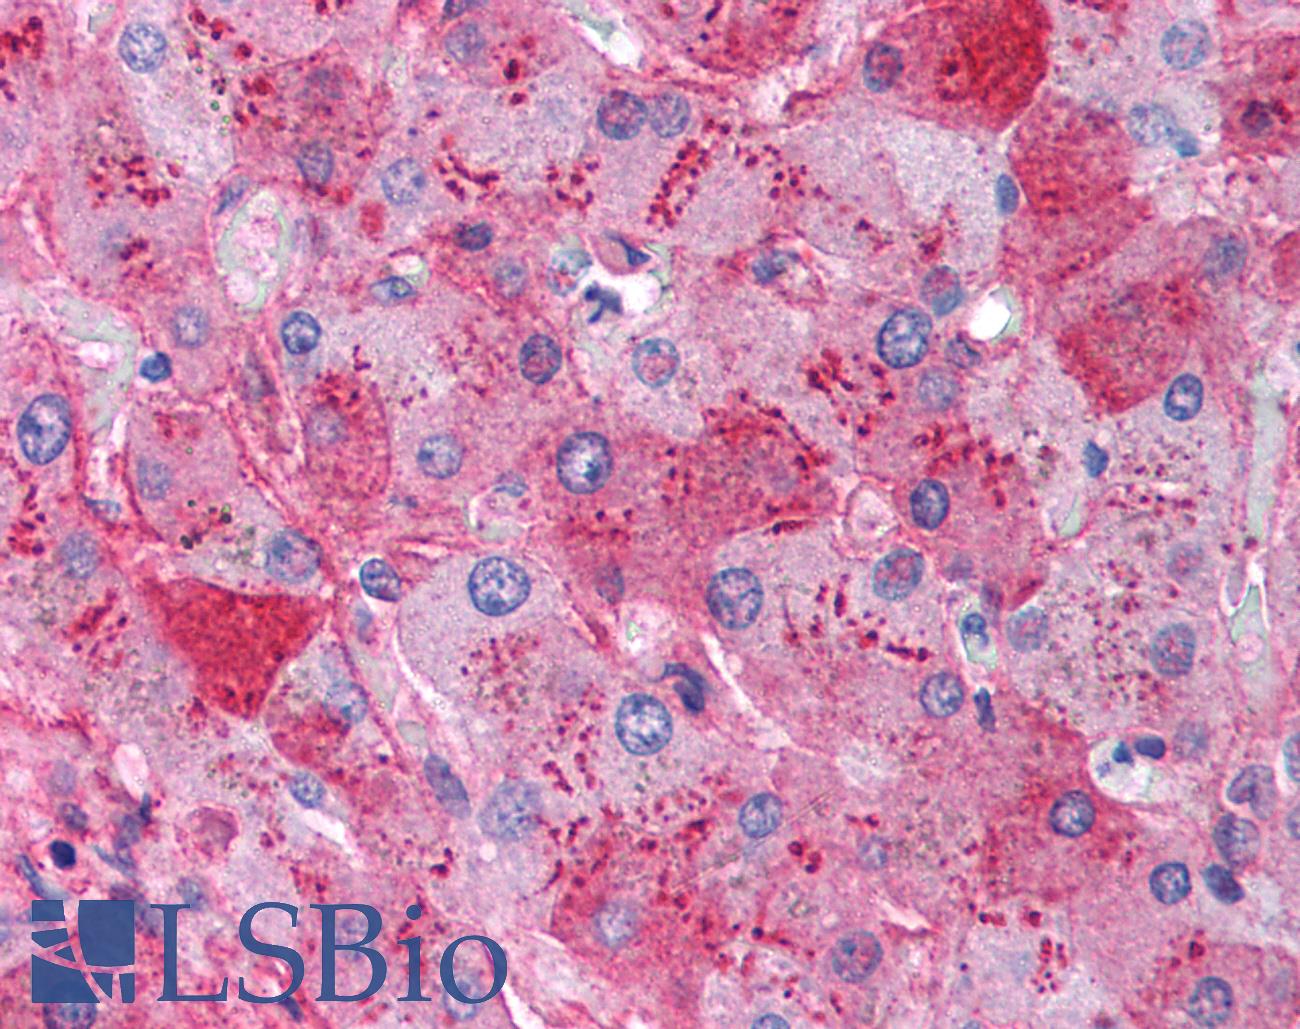 Fibrinogen Antibody - Anti-Fibrinogen antibody IHC of human liver. Immunohistochemistry of formalin-fixed, paraffin-embedded tissue after heat-induced antigen retrieval. Antibody concentration 5 ug/ml.